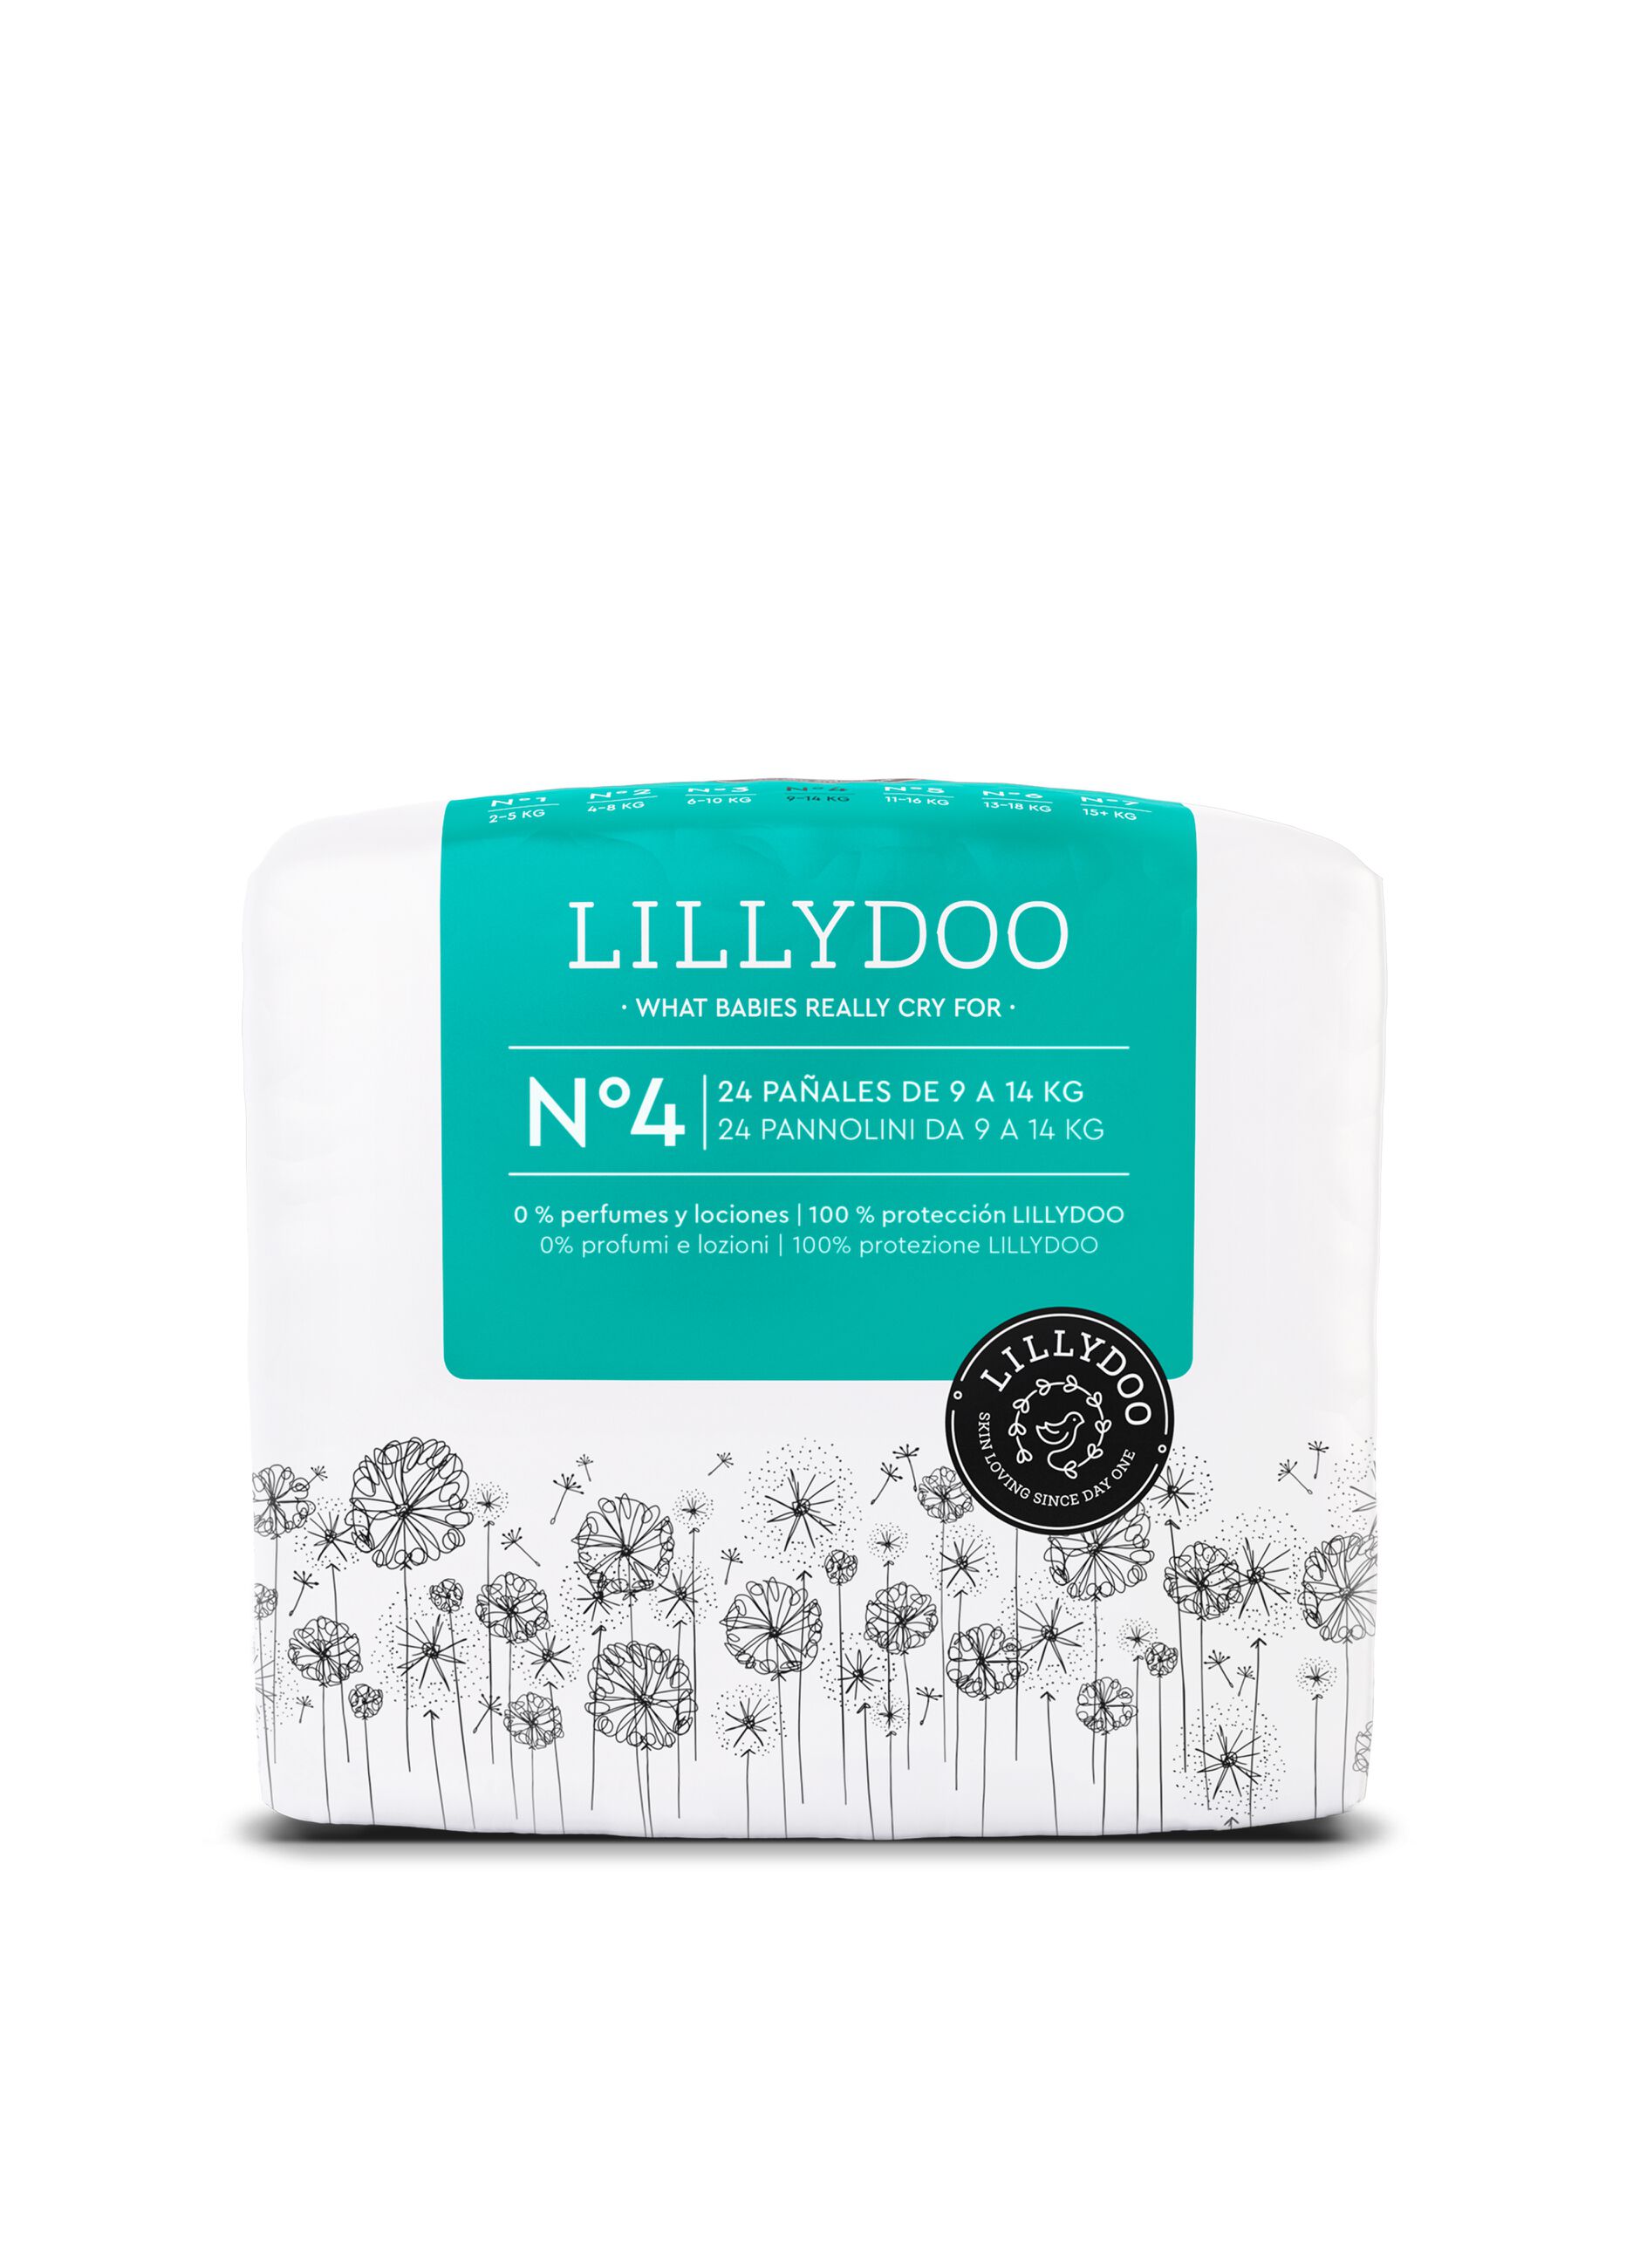 Pañales ecosostenibles N° 4 (9-14 kg) Lillydoo